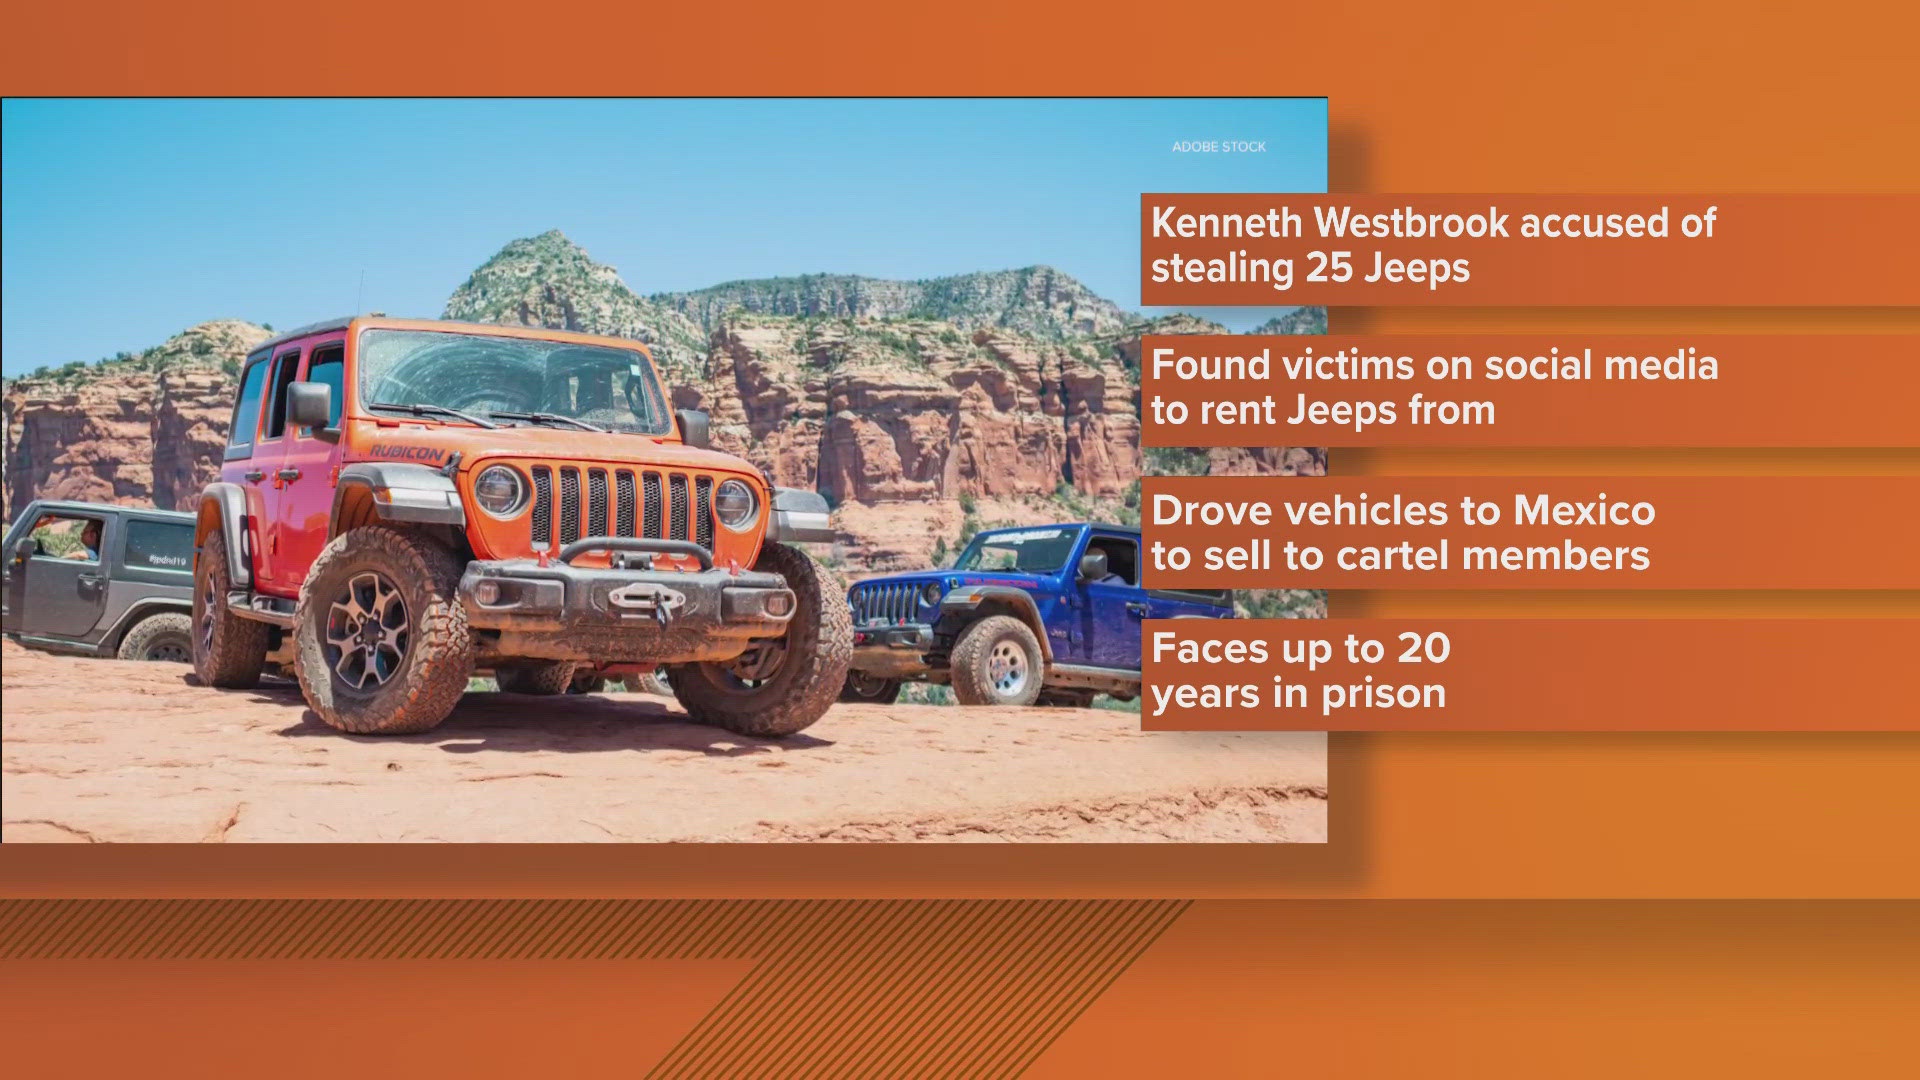 Investigators said the man reportedly attempted to sell 25 stolen Jeeps to members of the Mexican cartel.